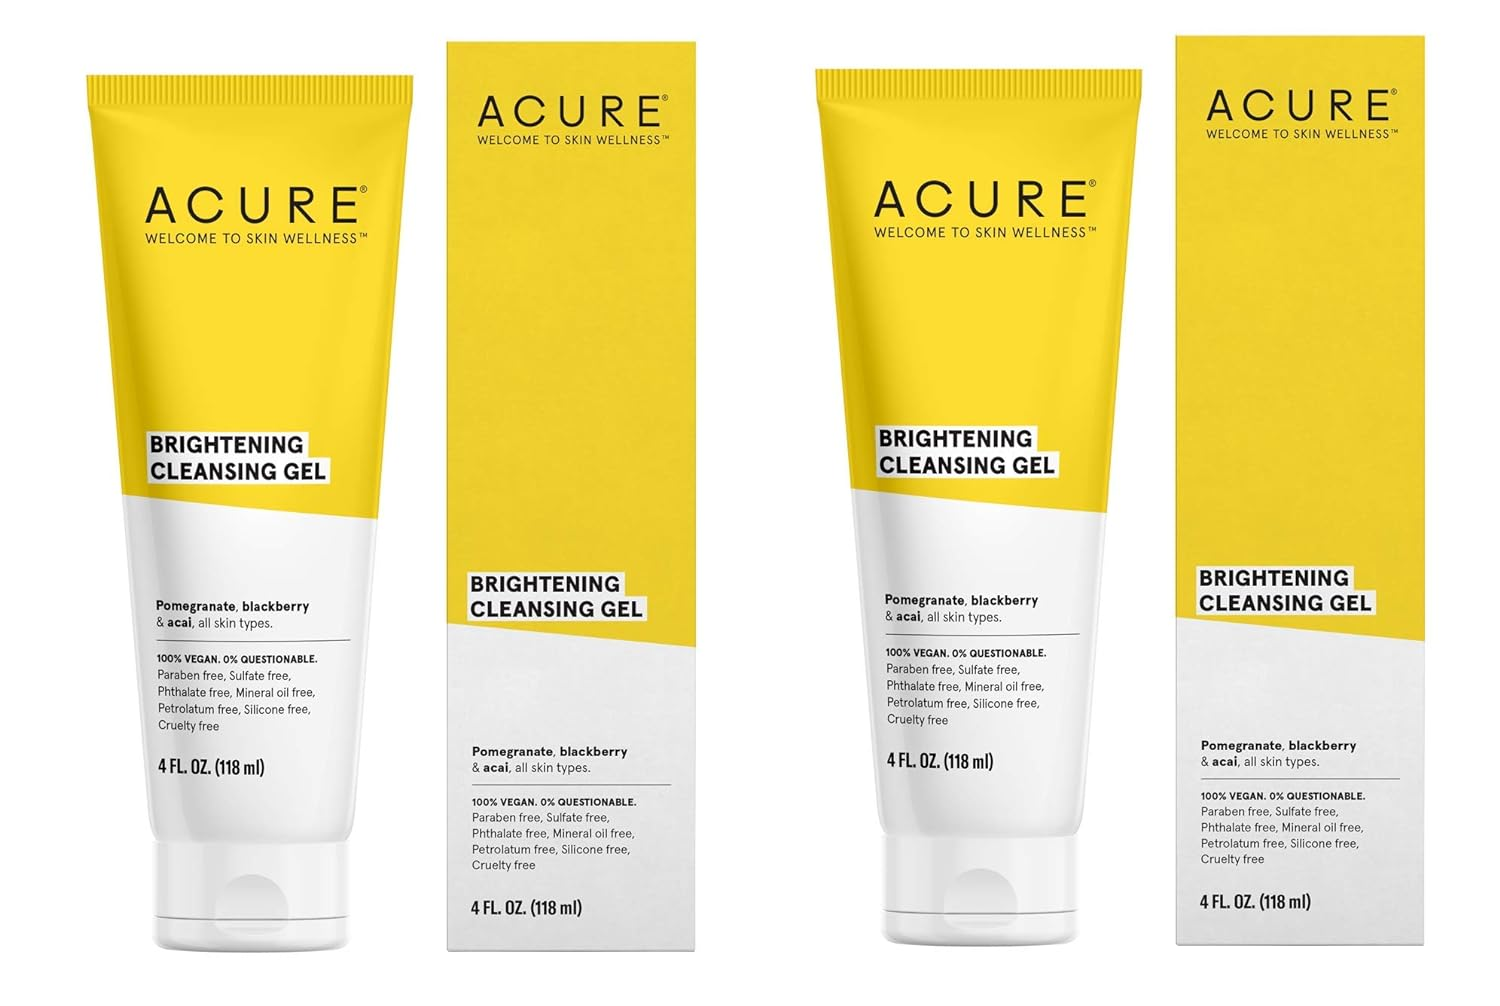 Acure face wash: Price, Benefits, Ingredients, For Acne & Dry Skin?